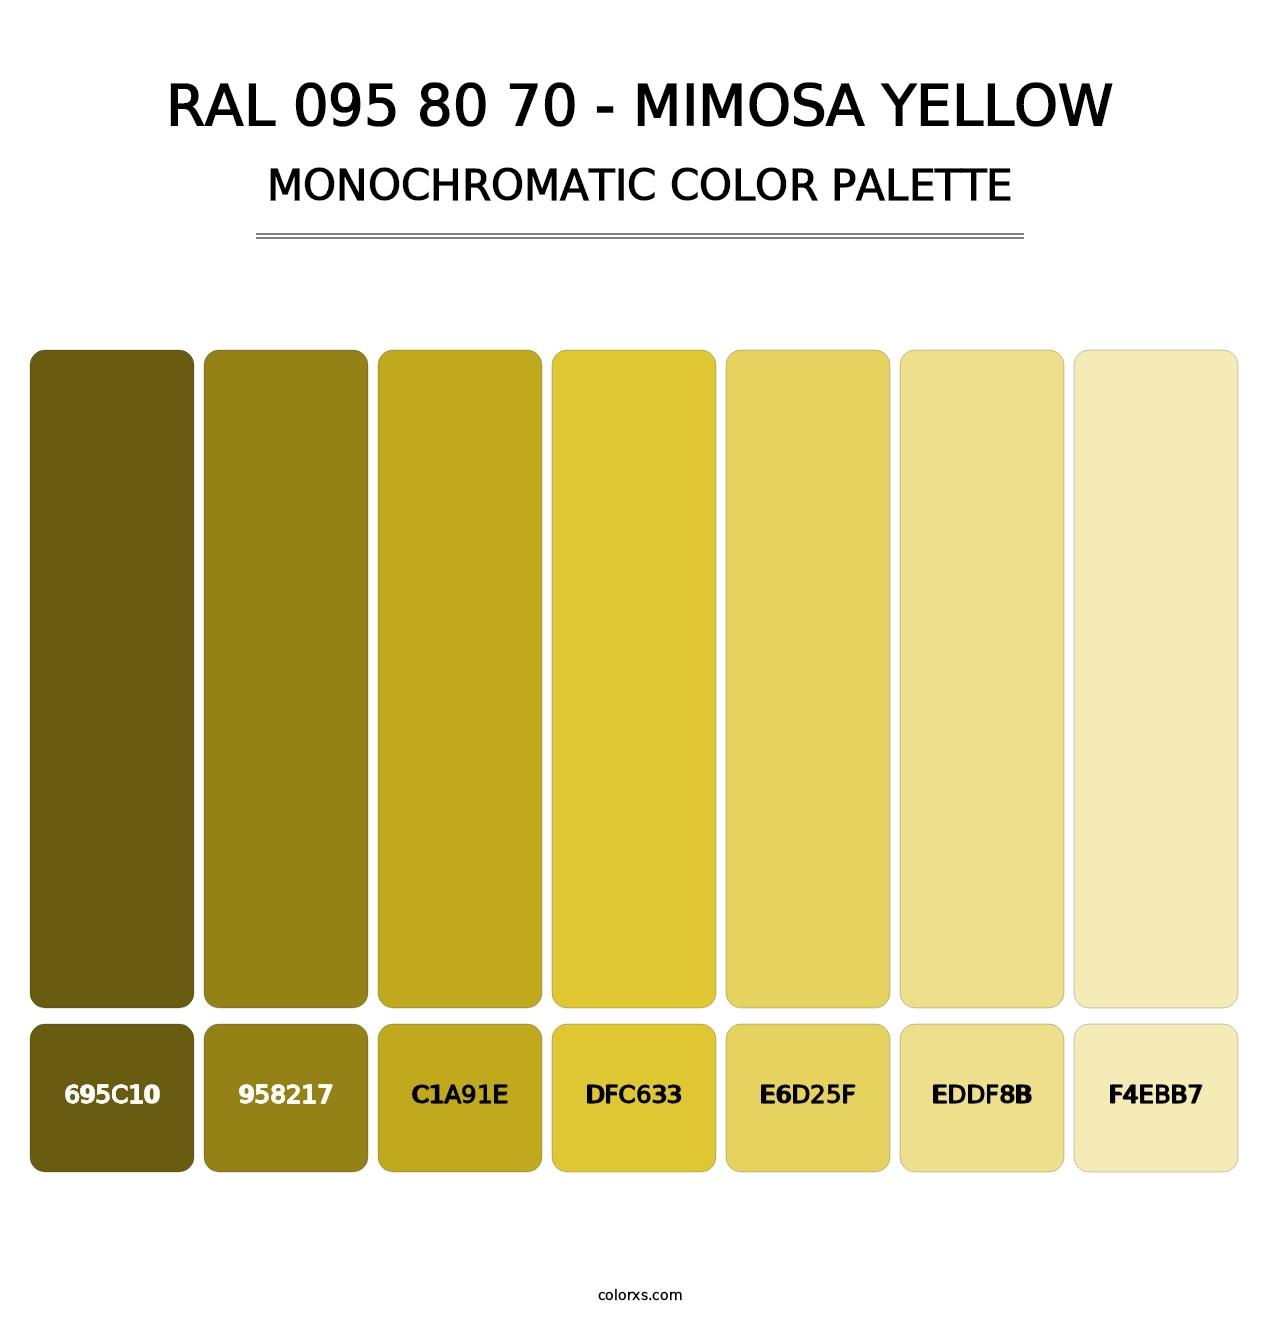 RAL 095 80 70 - Mimosa Yellow - Monochromatic Color Palette